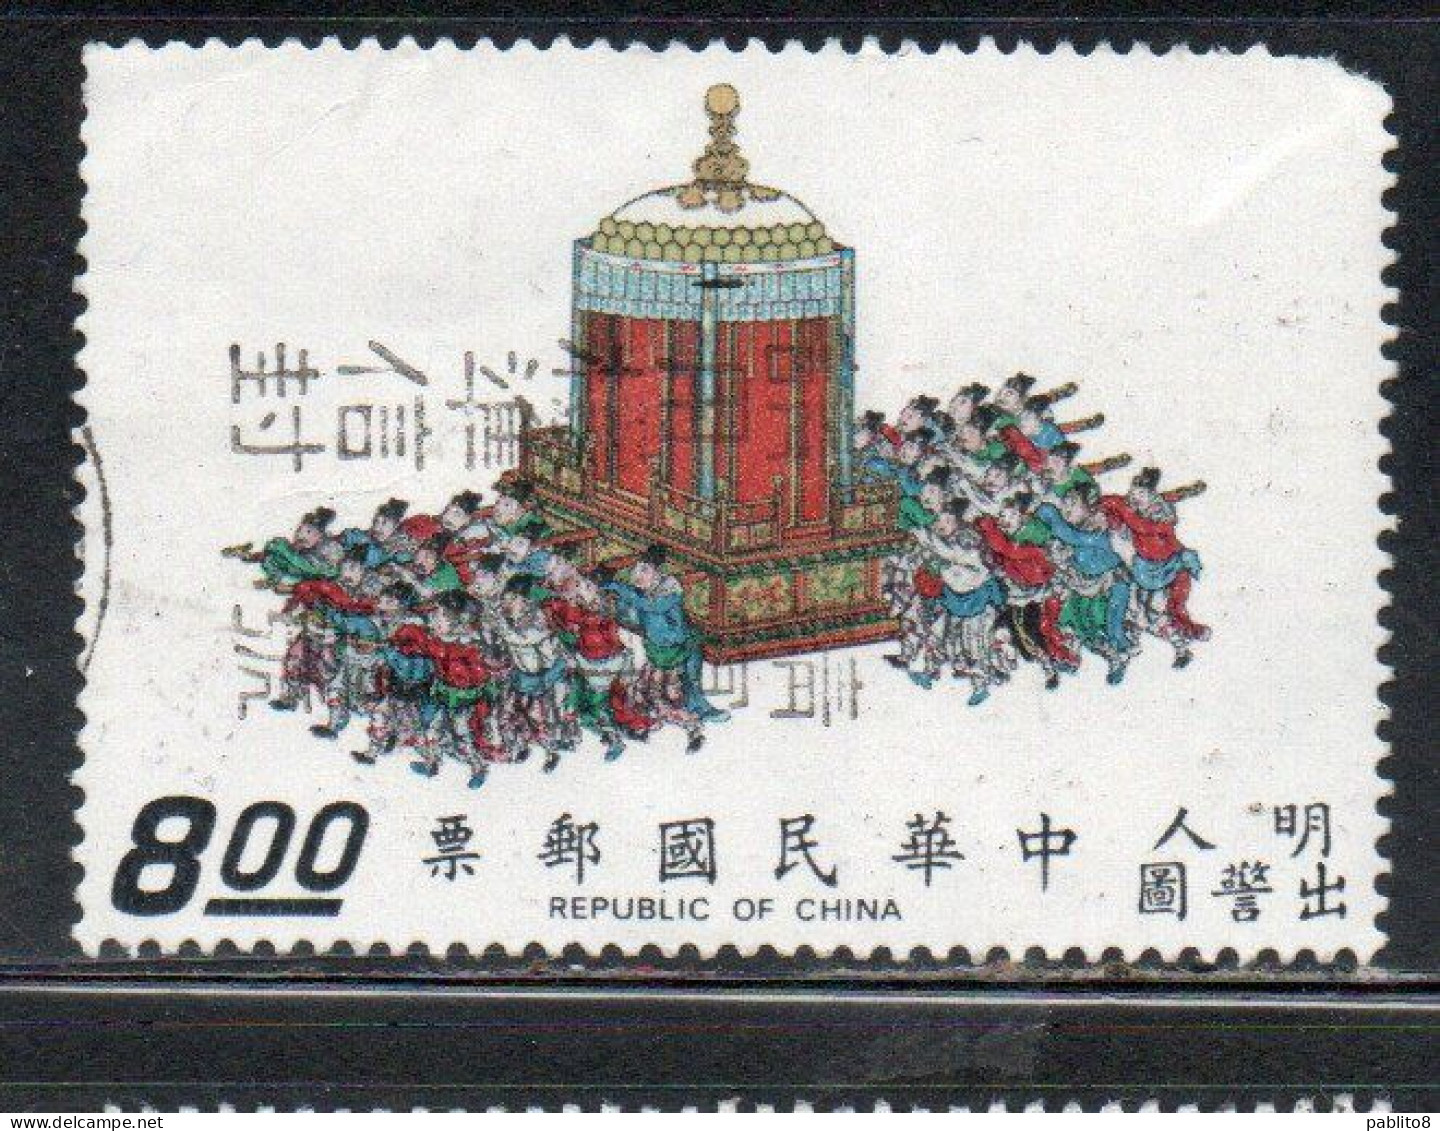 CHINA REPUBLIC CINA TAIWAN FORMOSA 1972 SCROLLS DEPICTING EMPEROR SHIH-TSUNG'S SEDAN CHAIR CARRIED BY 28 ME8$ USED USATO - Used Stamps